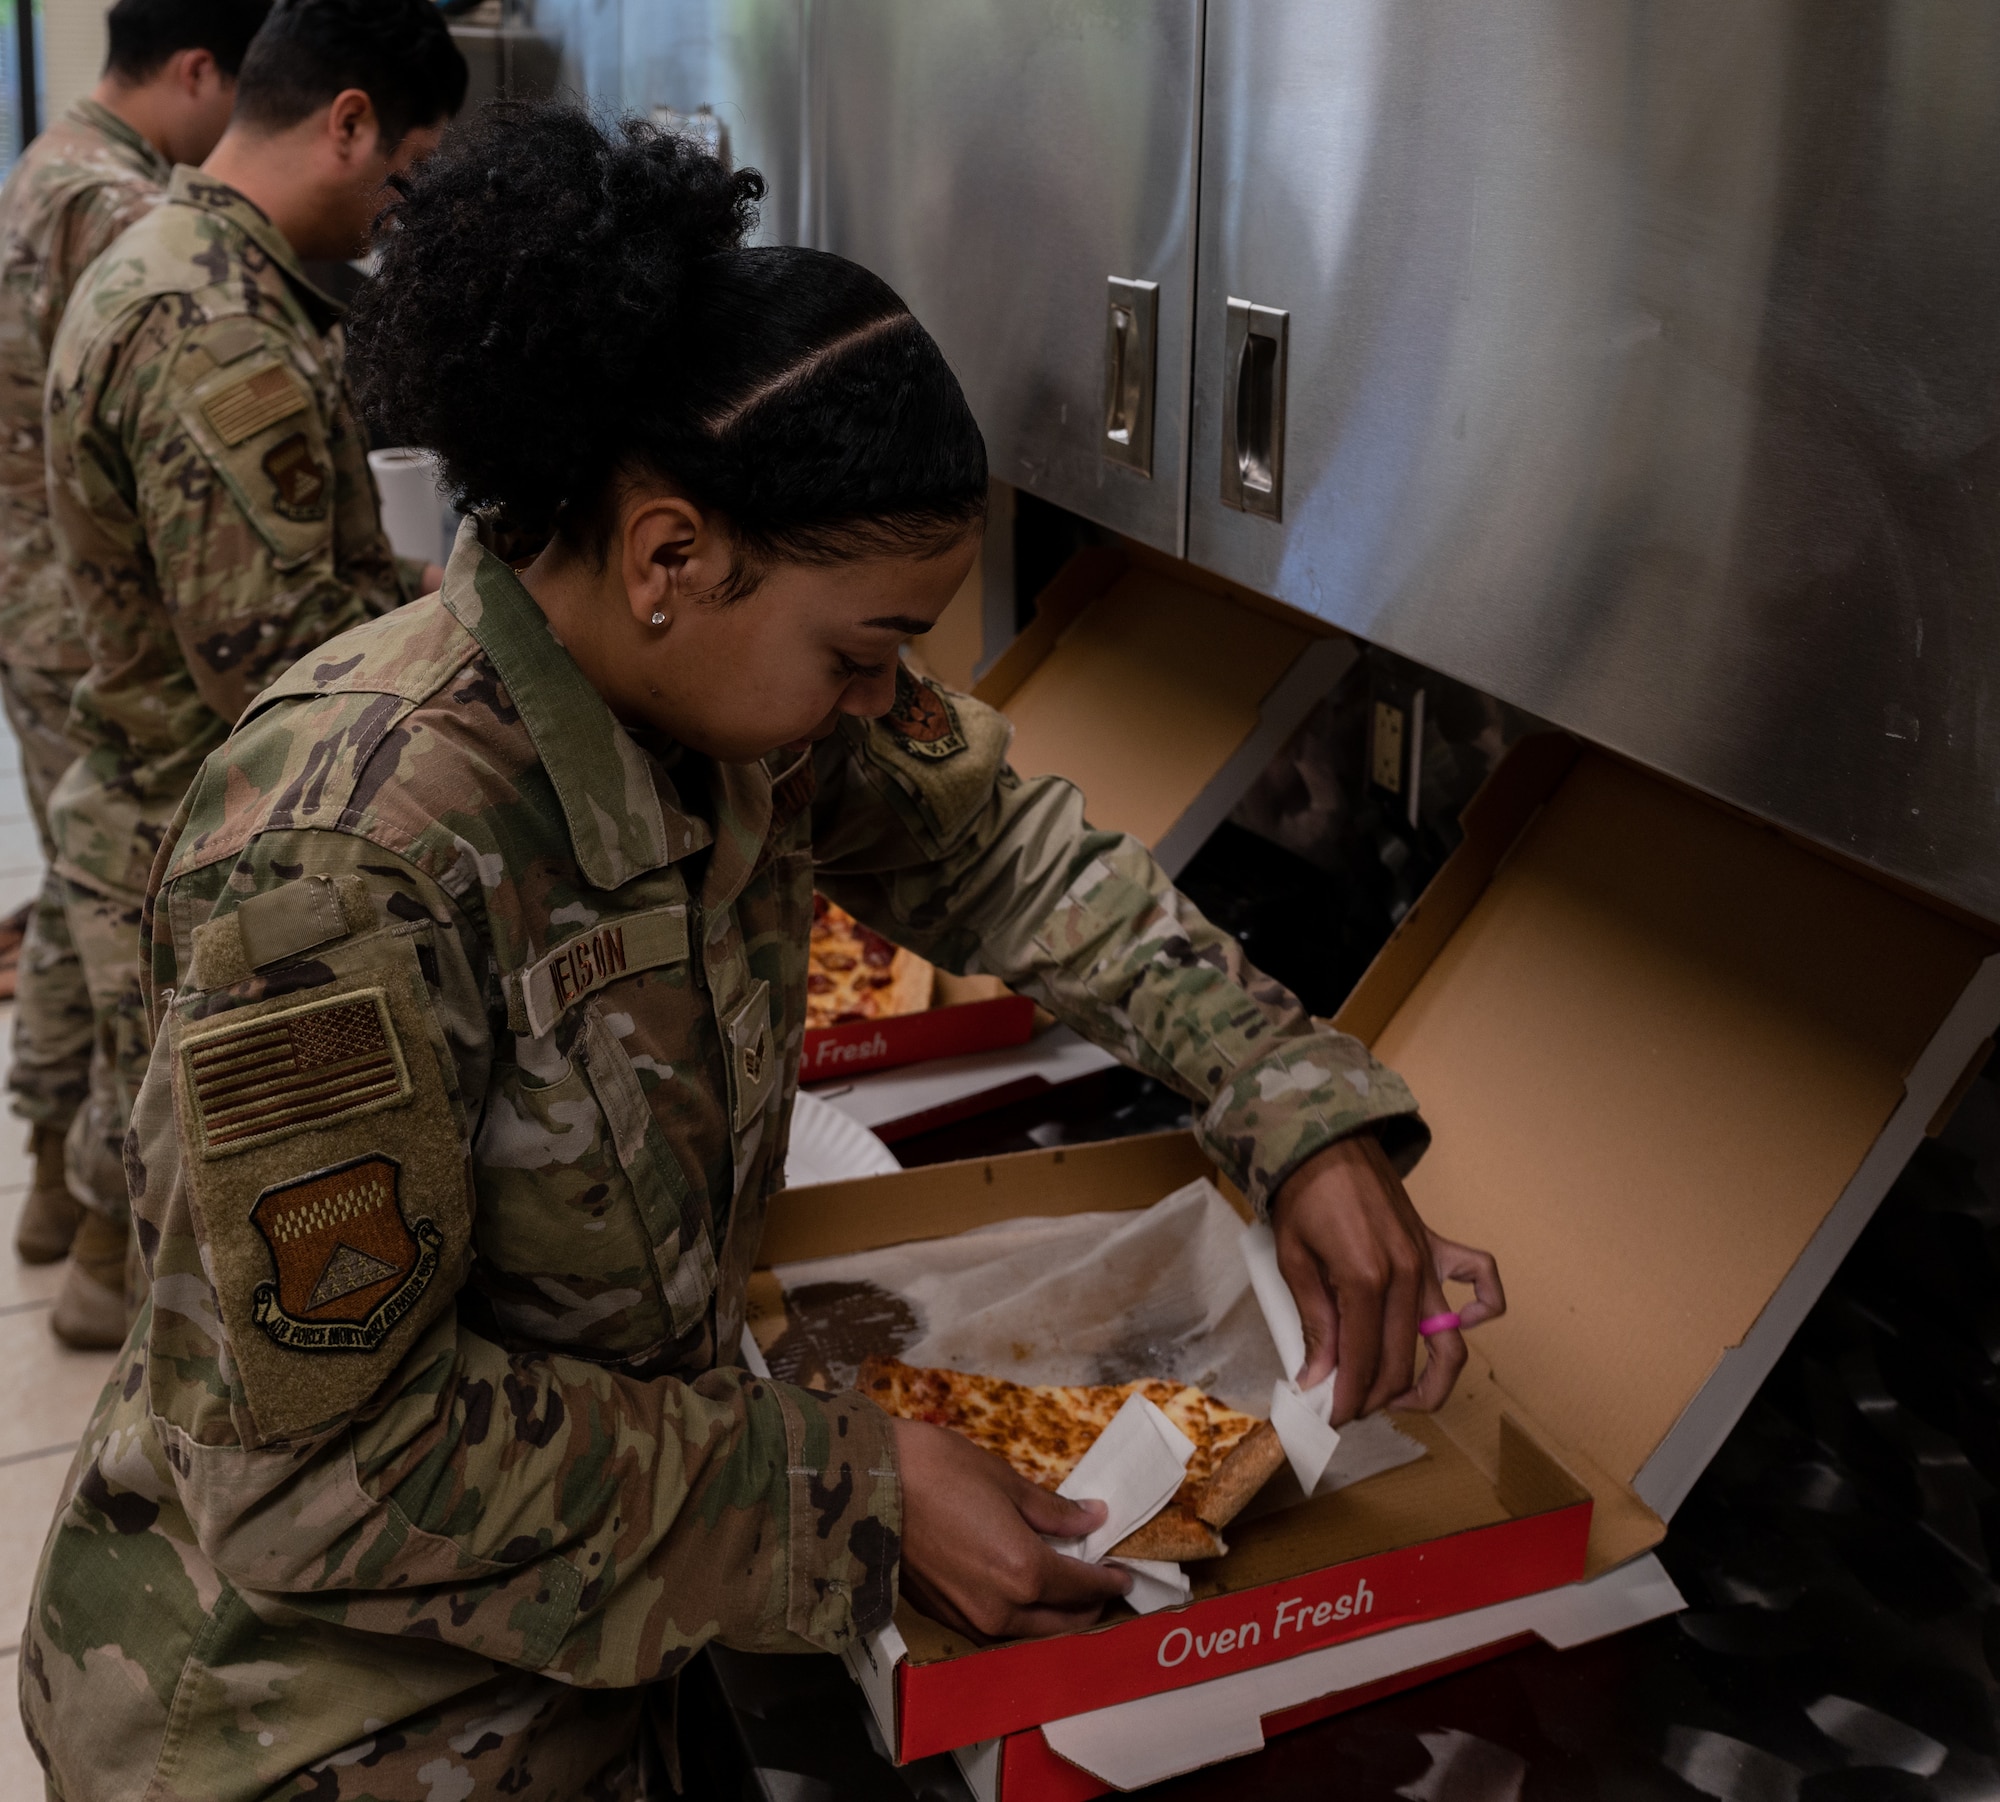 Airman grabs a slice of pizza